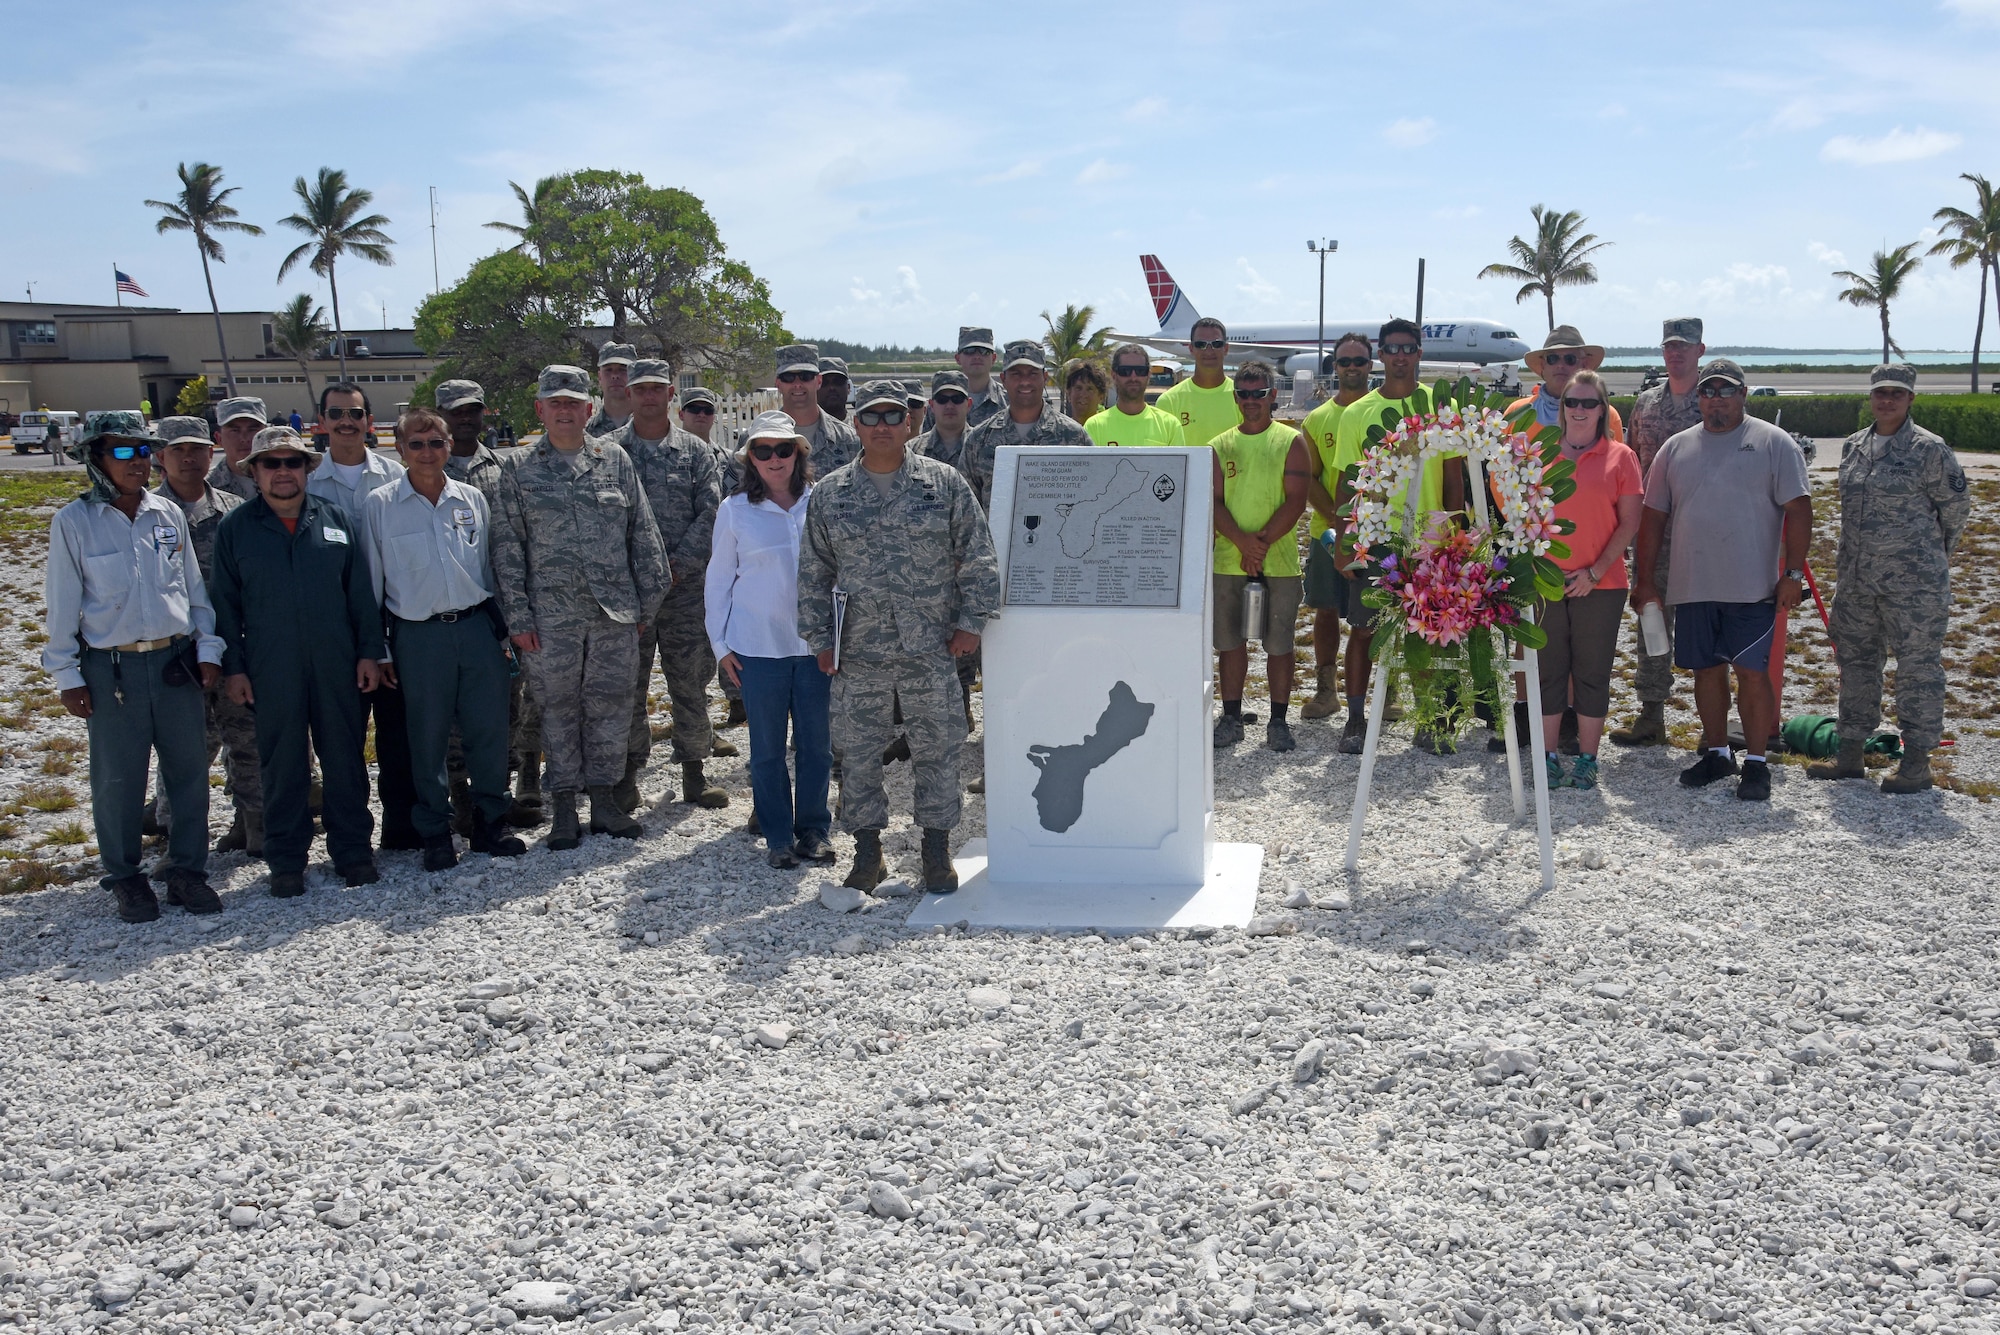 Attendees pose for a group photo during Wake Island’s Guam Memorial rededication ceremony June 8, 2017. The Guam Memorial on Wake Island was erected in 1991 to honor 45 Chamorros from Guam who worked for Pan American airlines. On Dec. 8, 1941, just a few hours of the attack on Pearl Harbor, Hawaii, Japanese forces attacked Wake Island and 10 of the 45 Chamorros were killed in the attack. The remaining 35 men were sent to prison camps in Japan and China where two died in captivity. Due to decades of corrosion, heat and sun, the memorial was degraded to the point where it became unreadable. During many months in 2017, the Guam Memorial was renovated to its original glory.